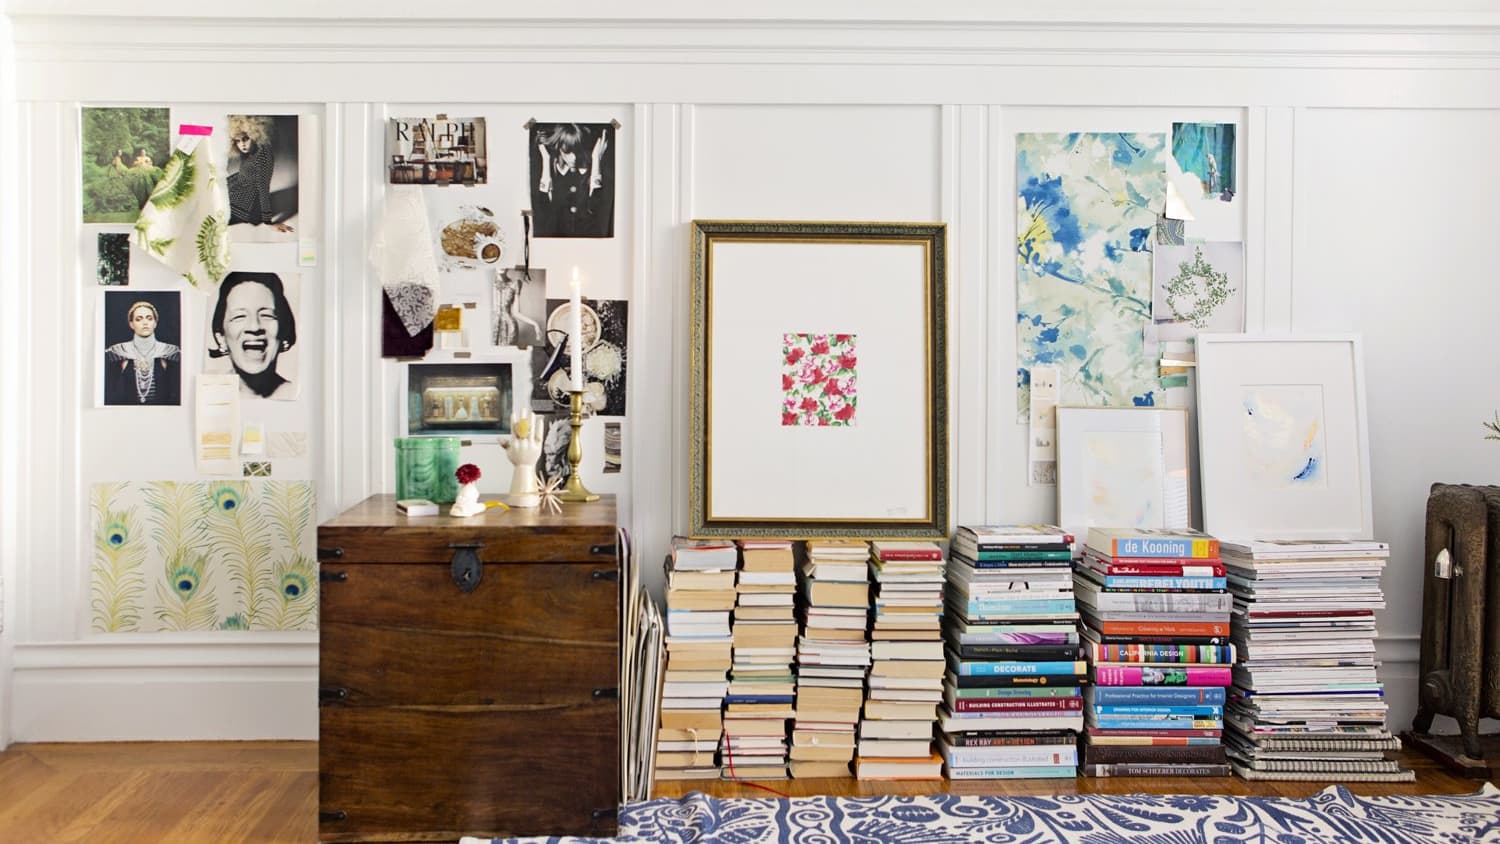 10 Wall Art Display Ideas That Aren't Another Gallery Wall - Brit + Co